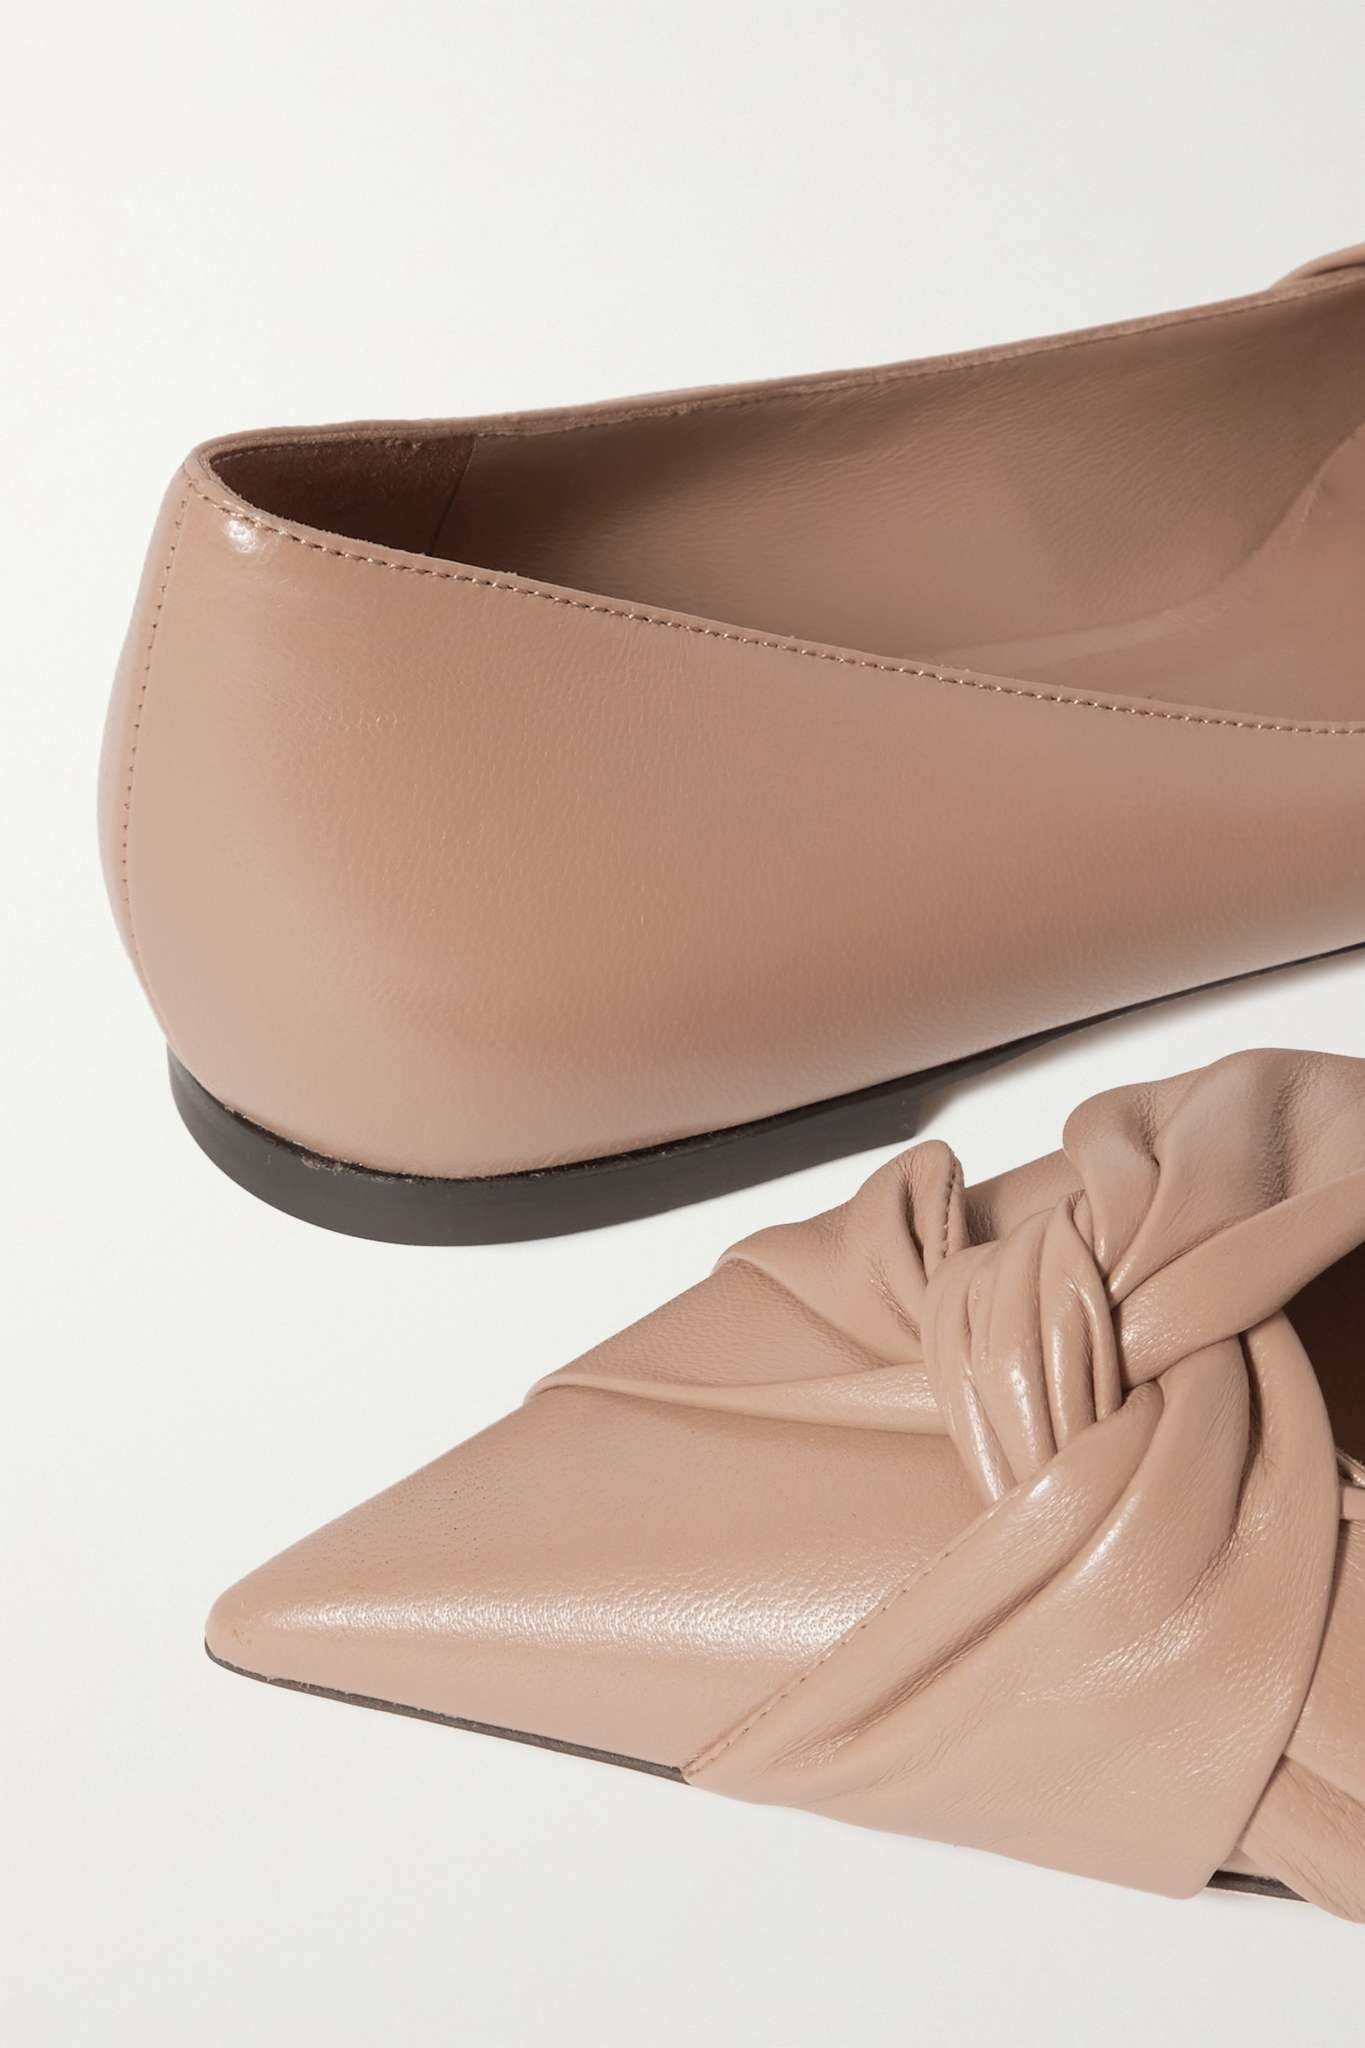 Hedera leather ballet flats